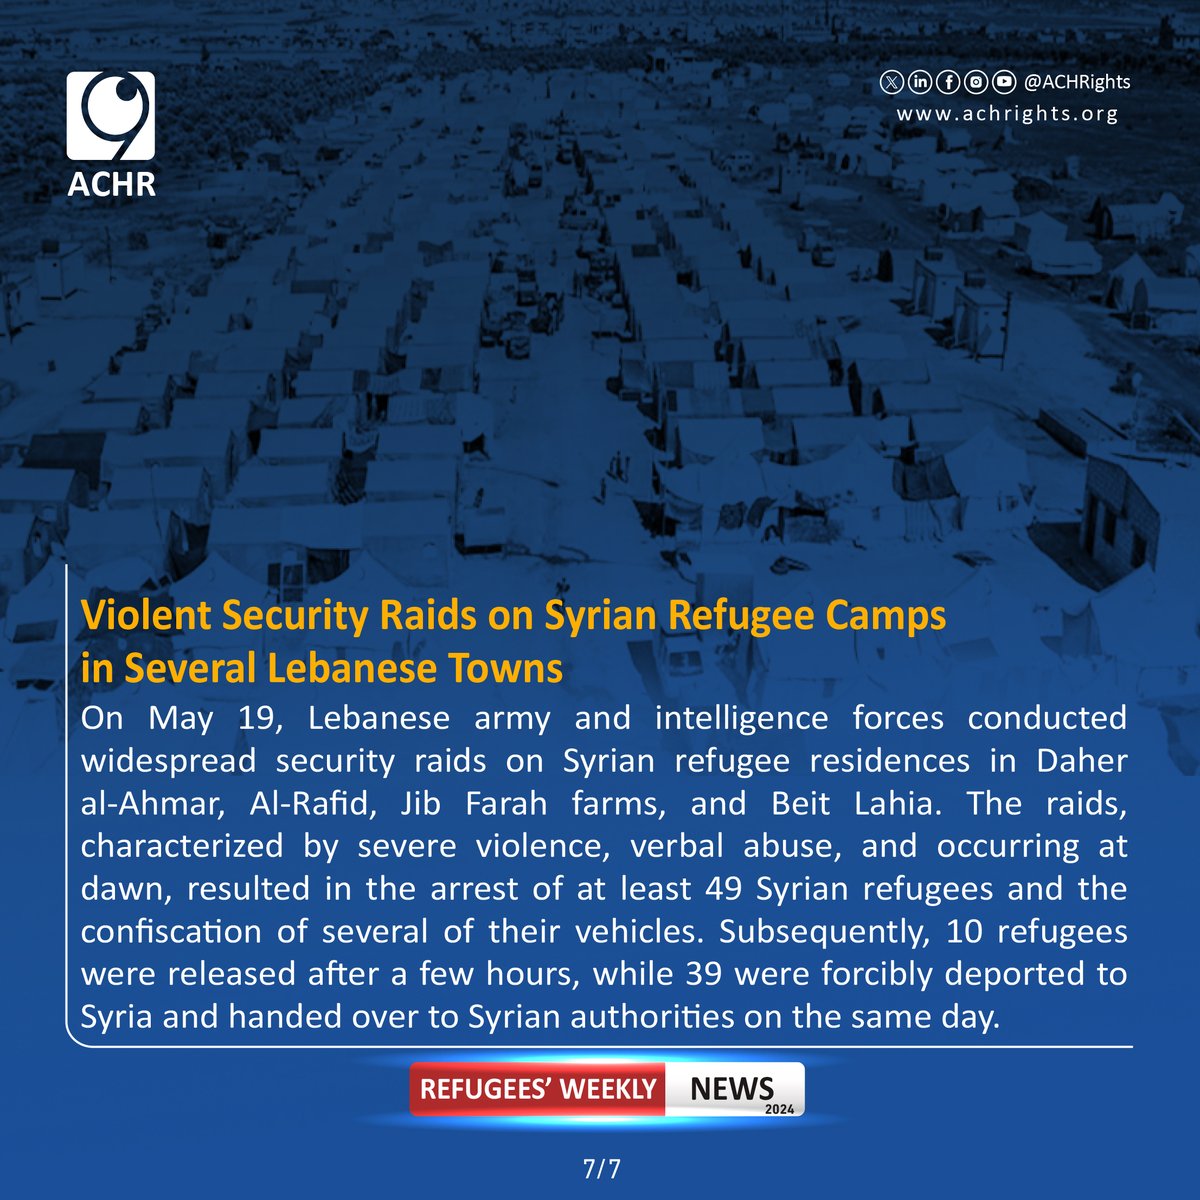 Violent Security Raids on Syrian Refugee Camps in Several Lebanese Towns.
#Together_for_Human_Rights #weeklynews #violations #humanrights #syrianrefugees #lebanon #syria #RefugeesRight